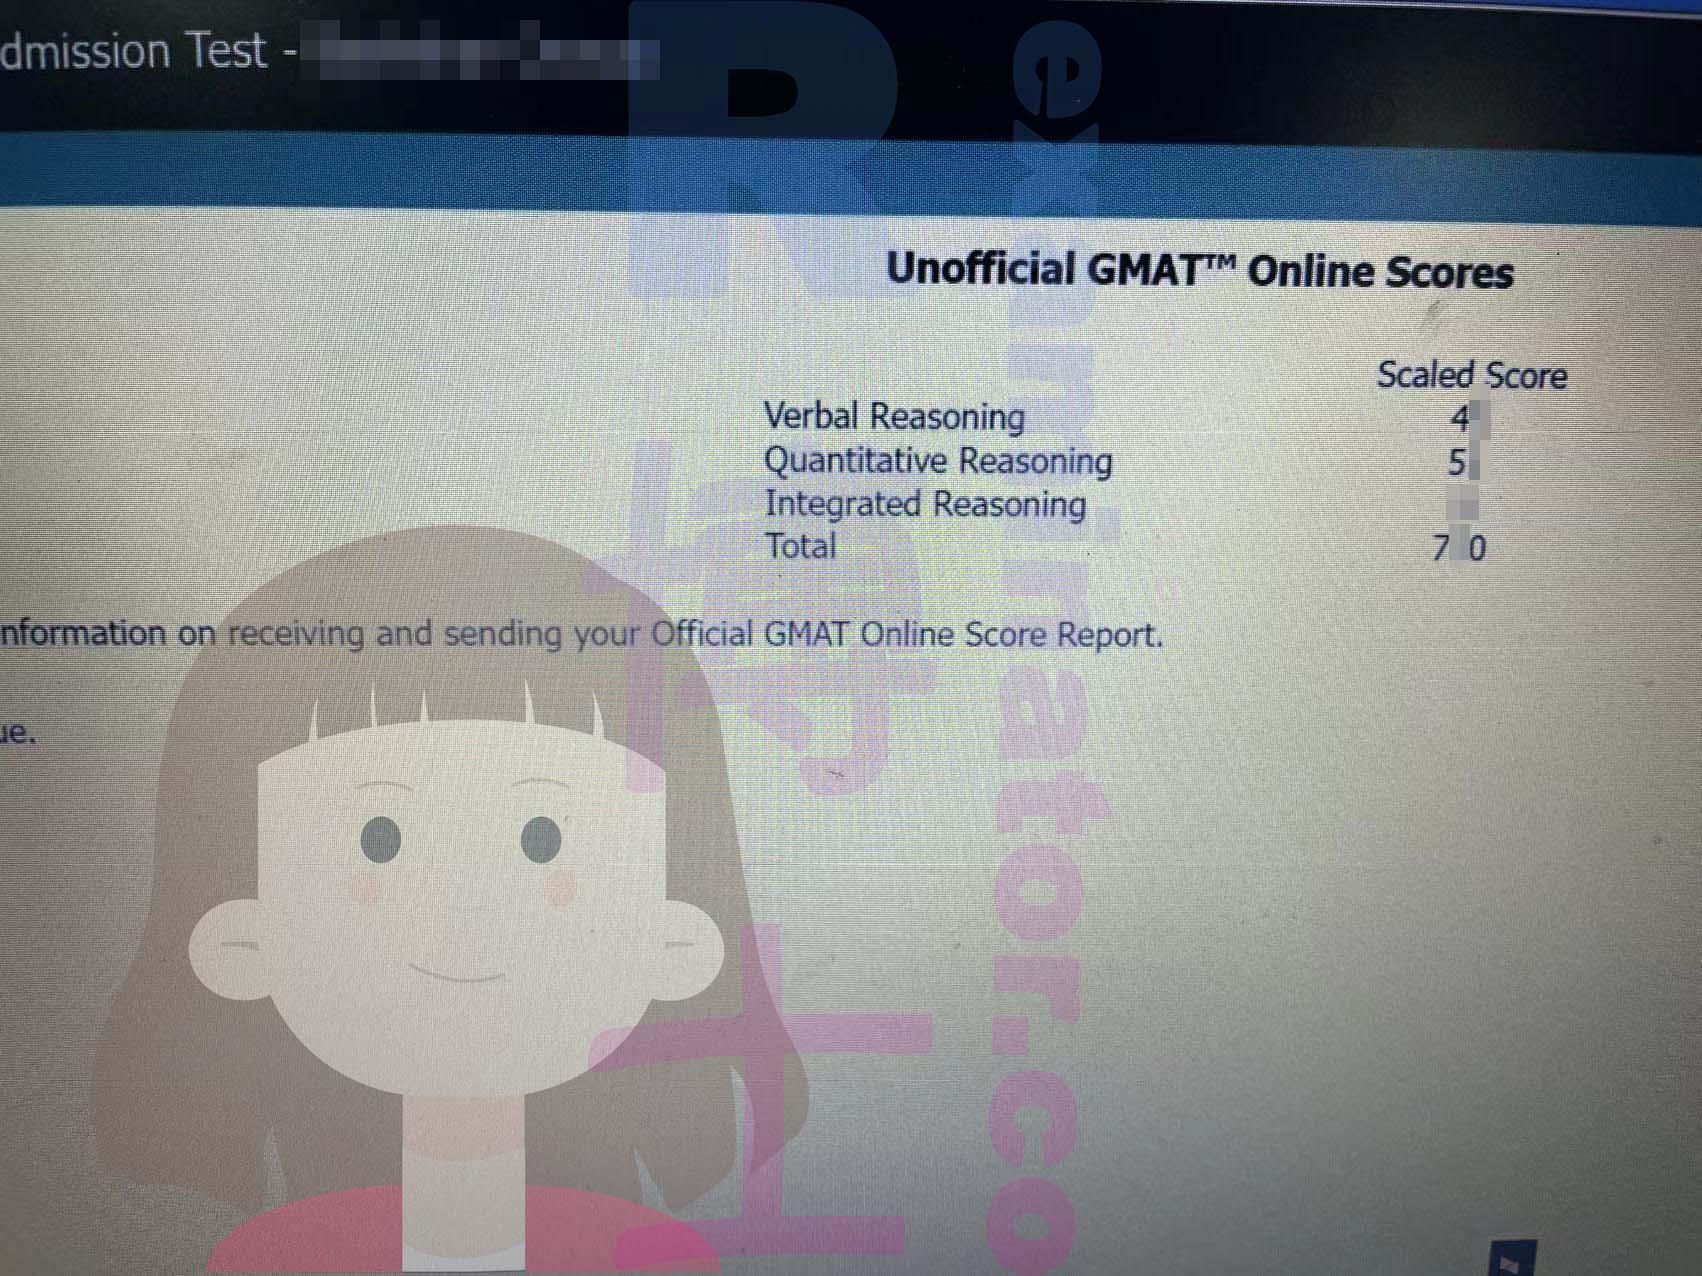 score image for GMAT Cheating success story #531